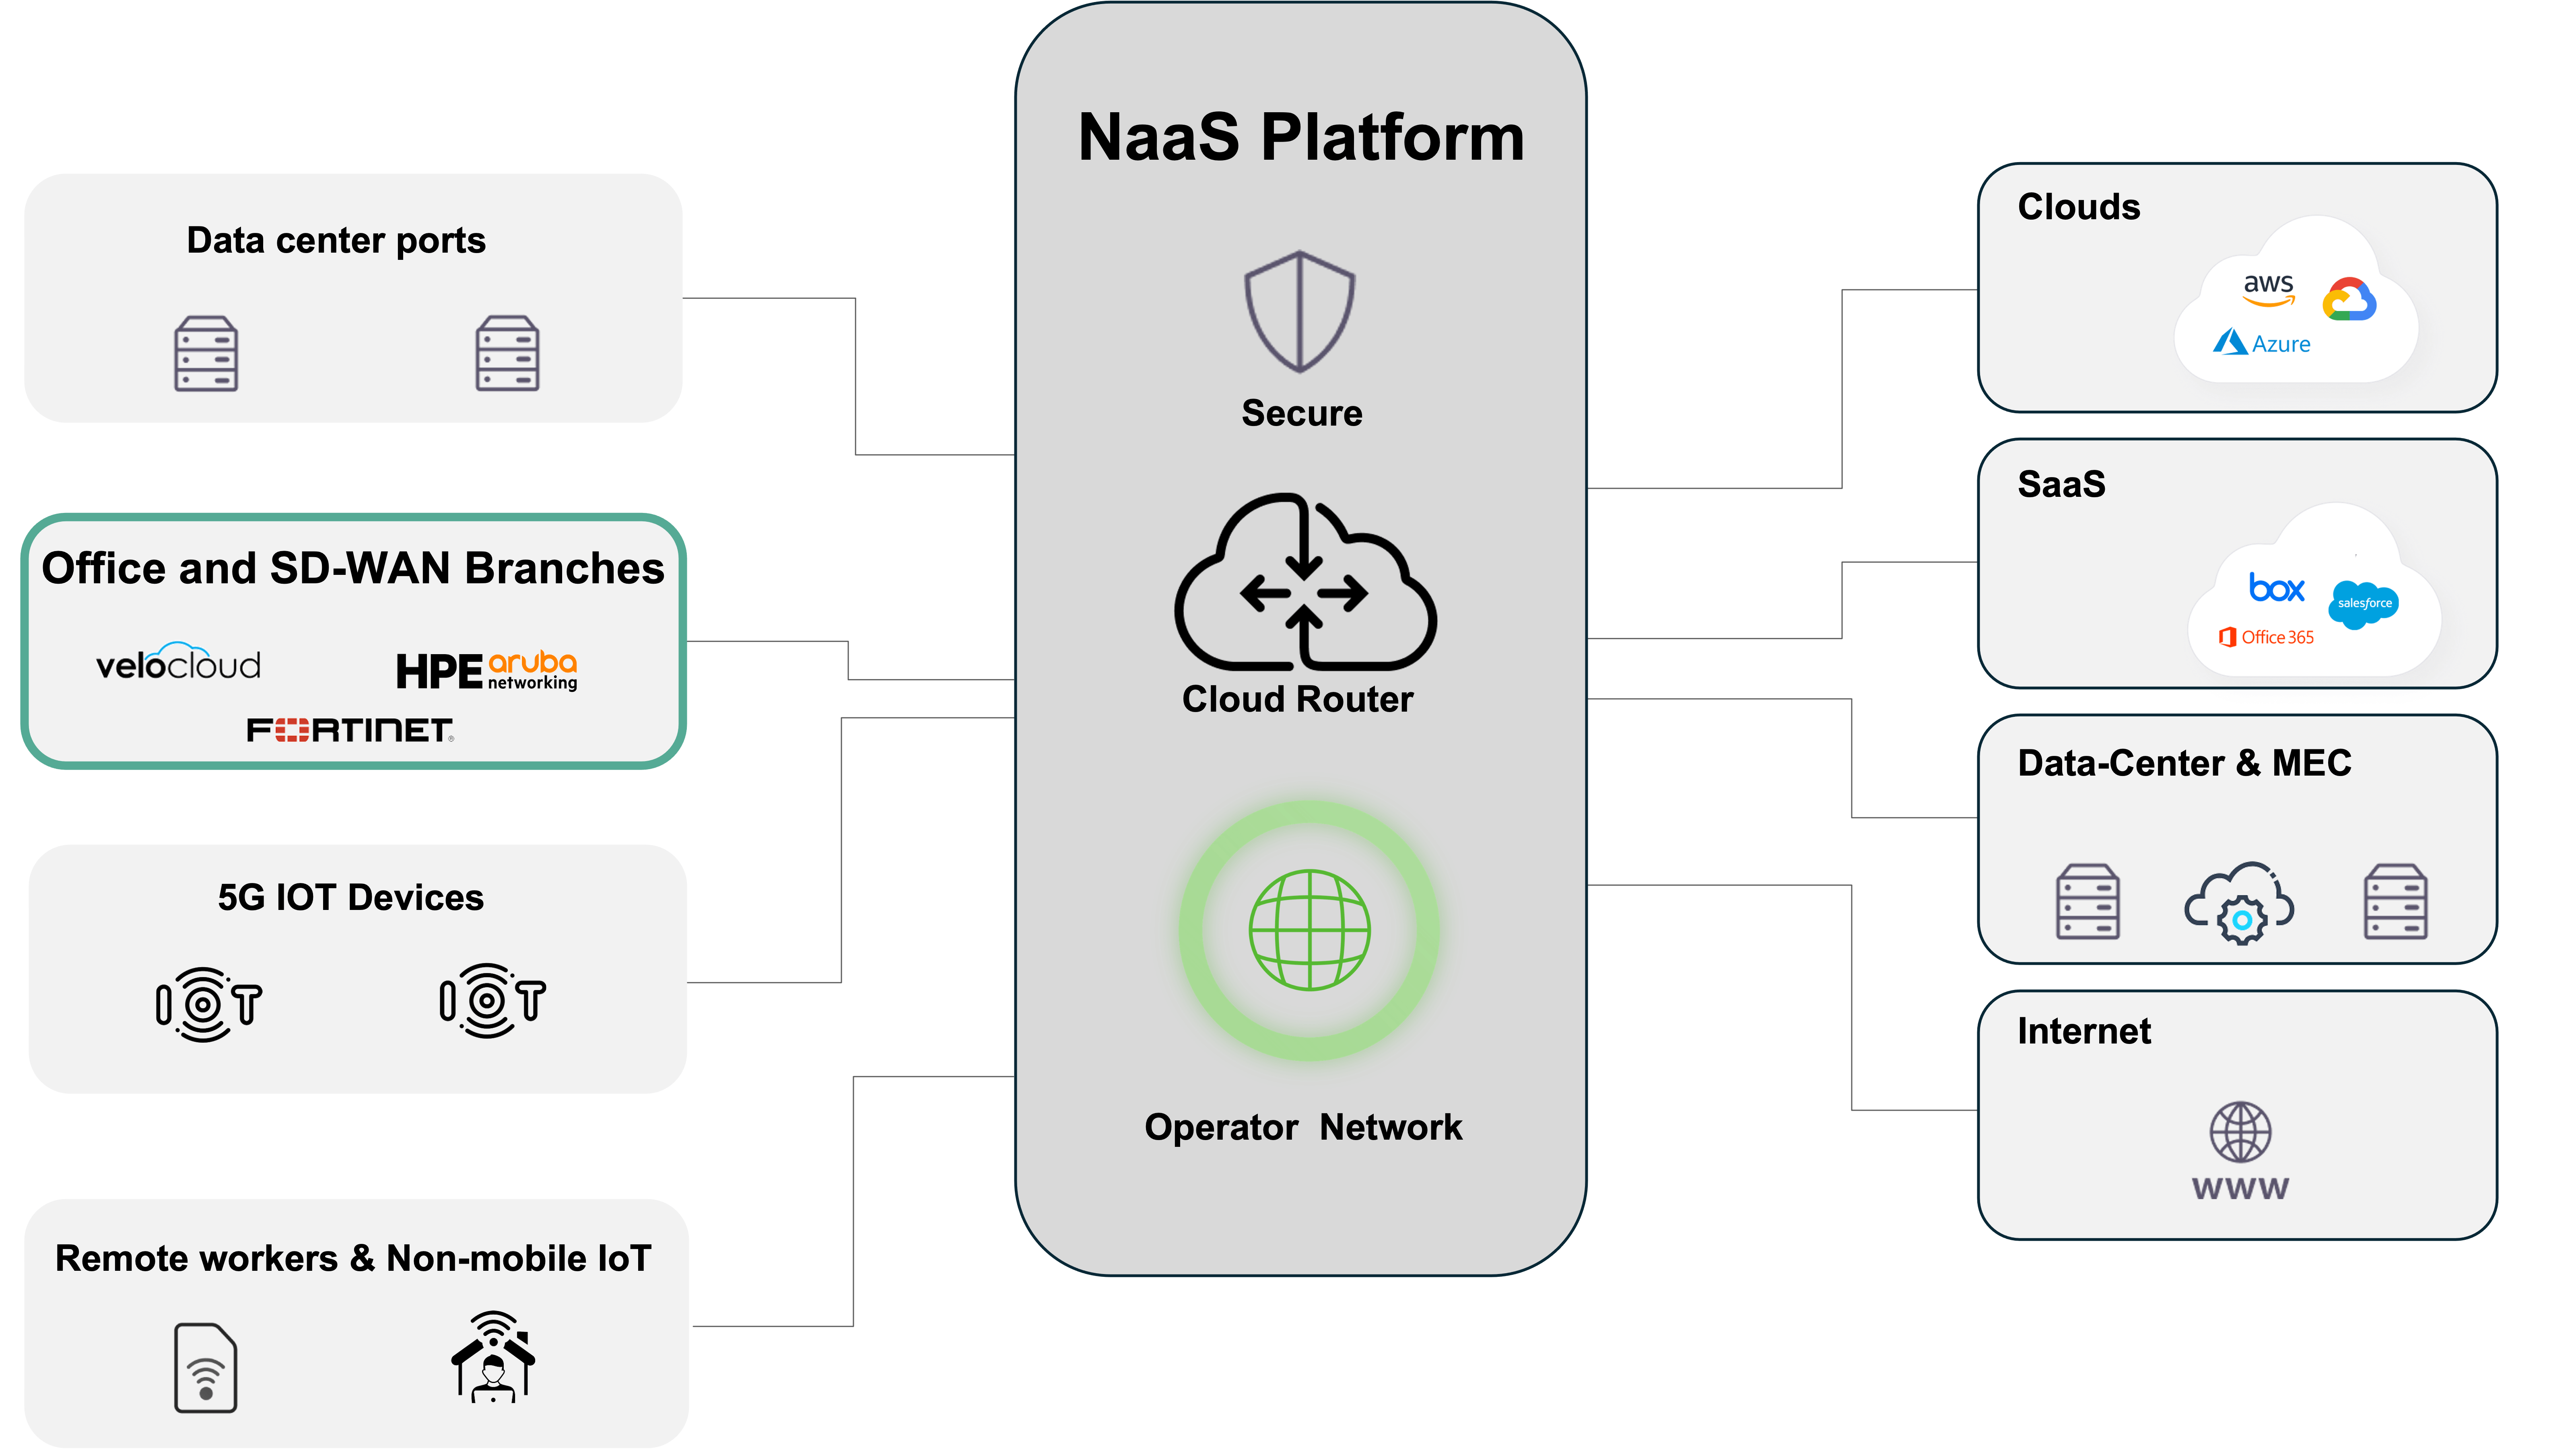 Power-up Your SD-WAN Offering with a NaaS Platform